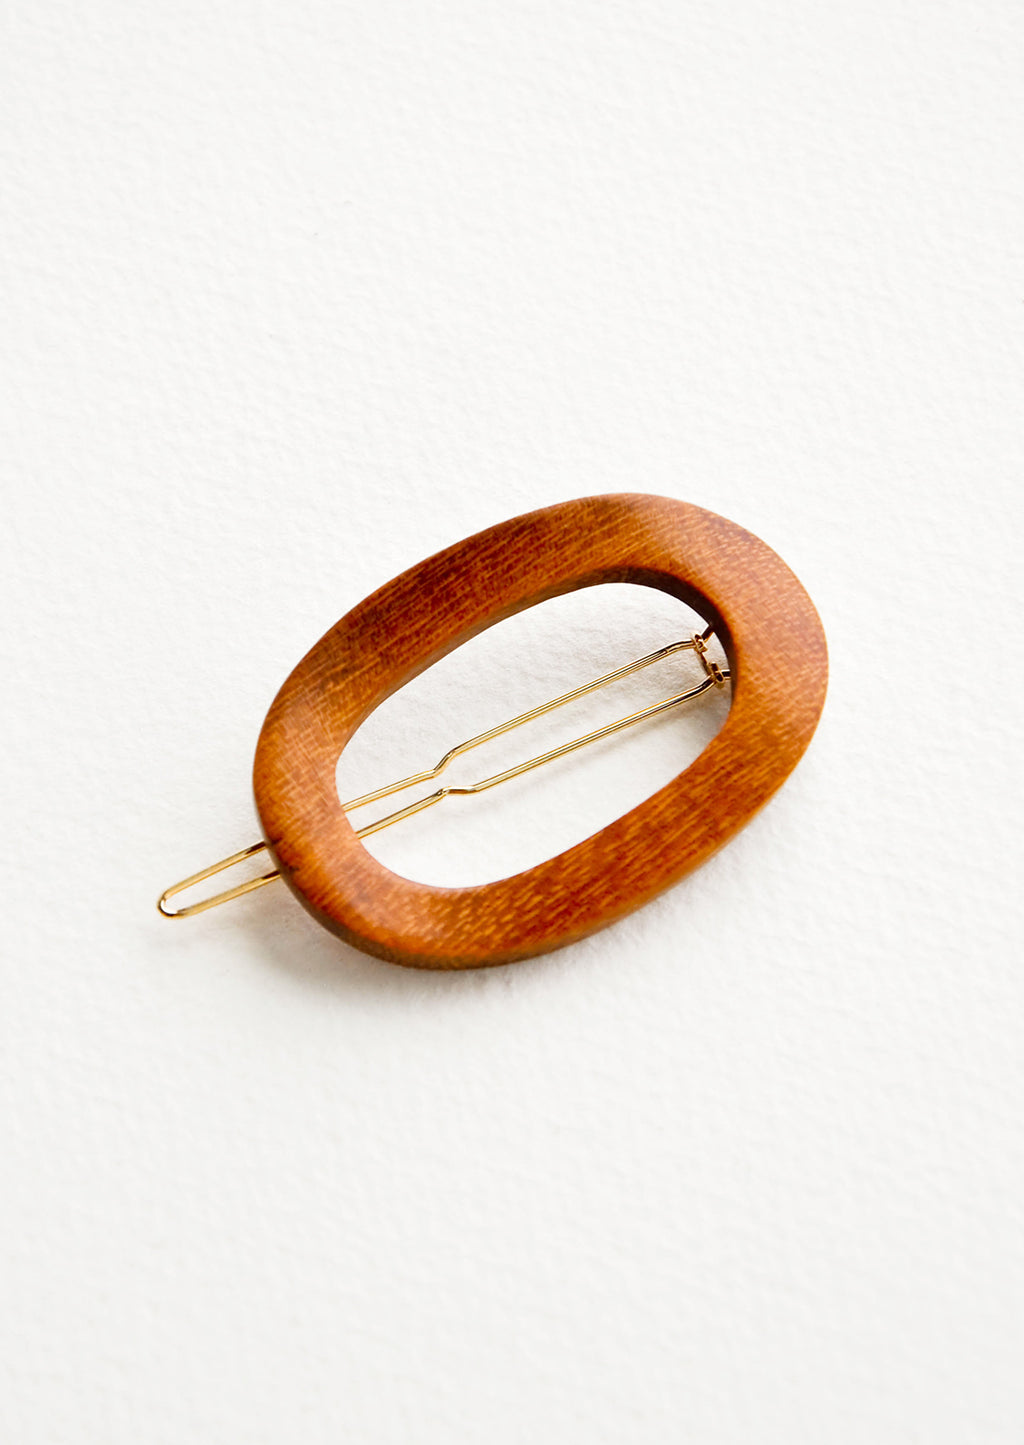 Brown: Oval shaped hair clip made out of brown wood with gold clasp